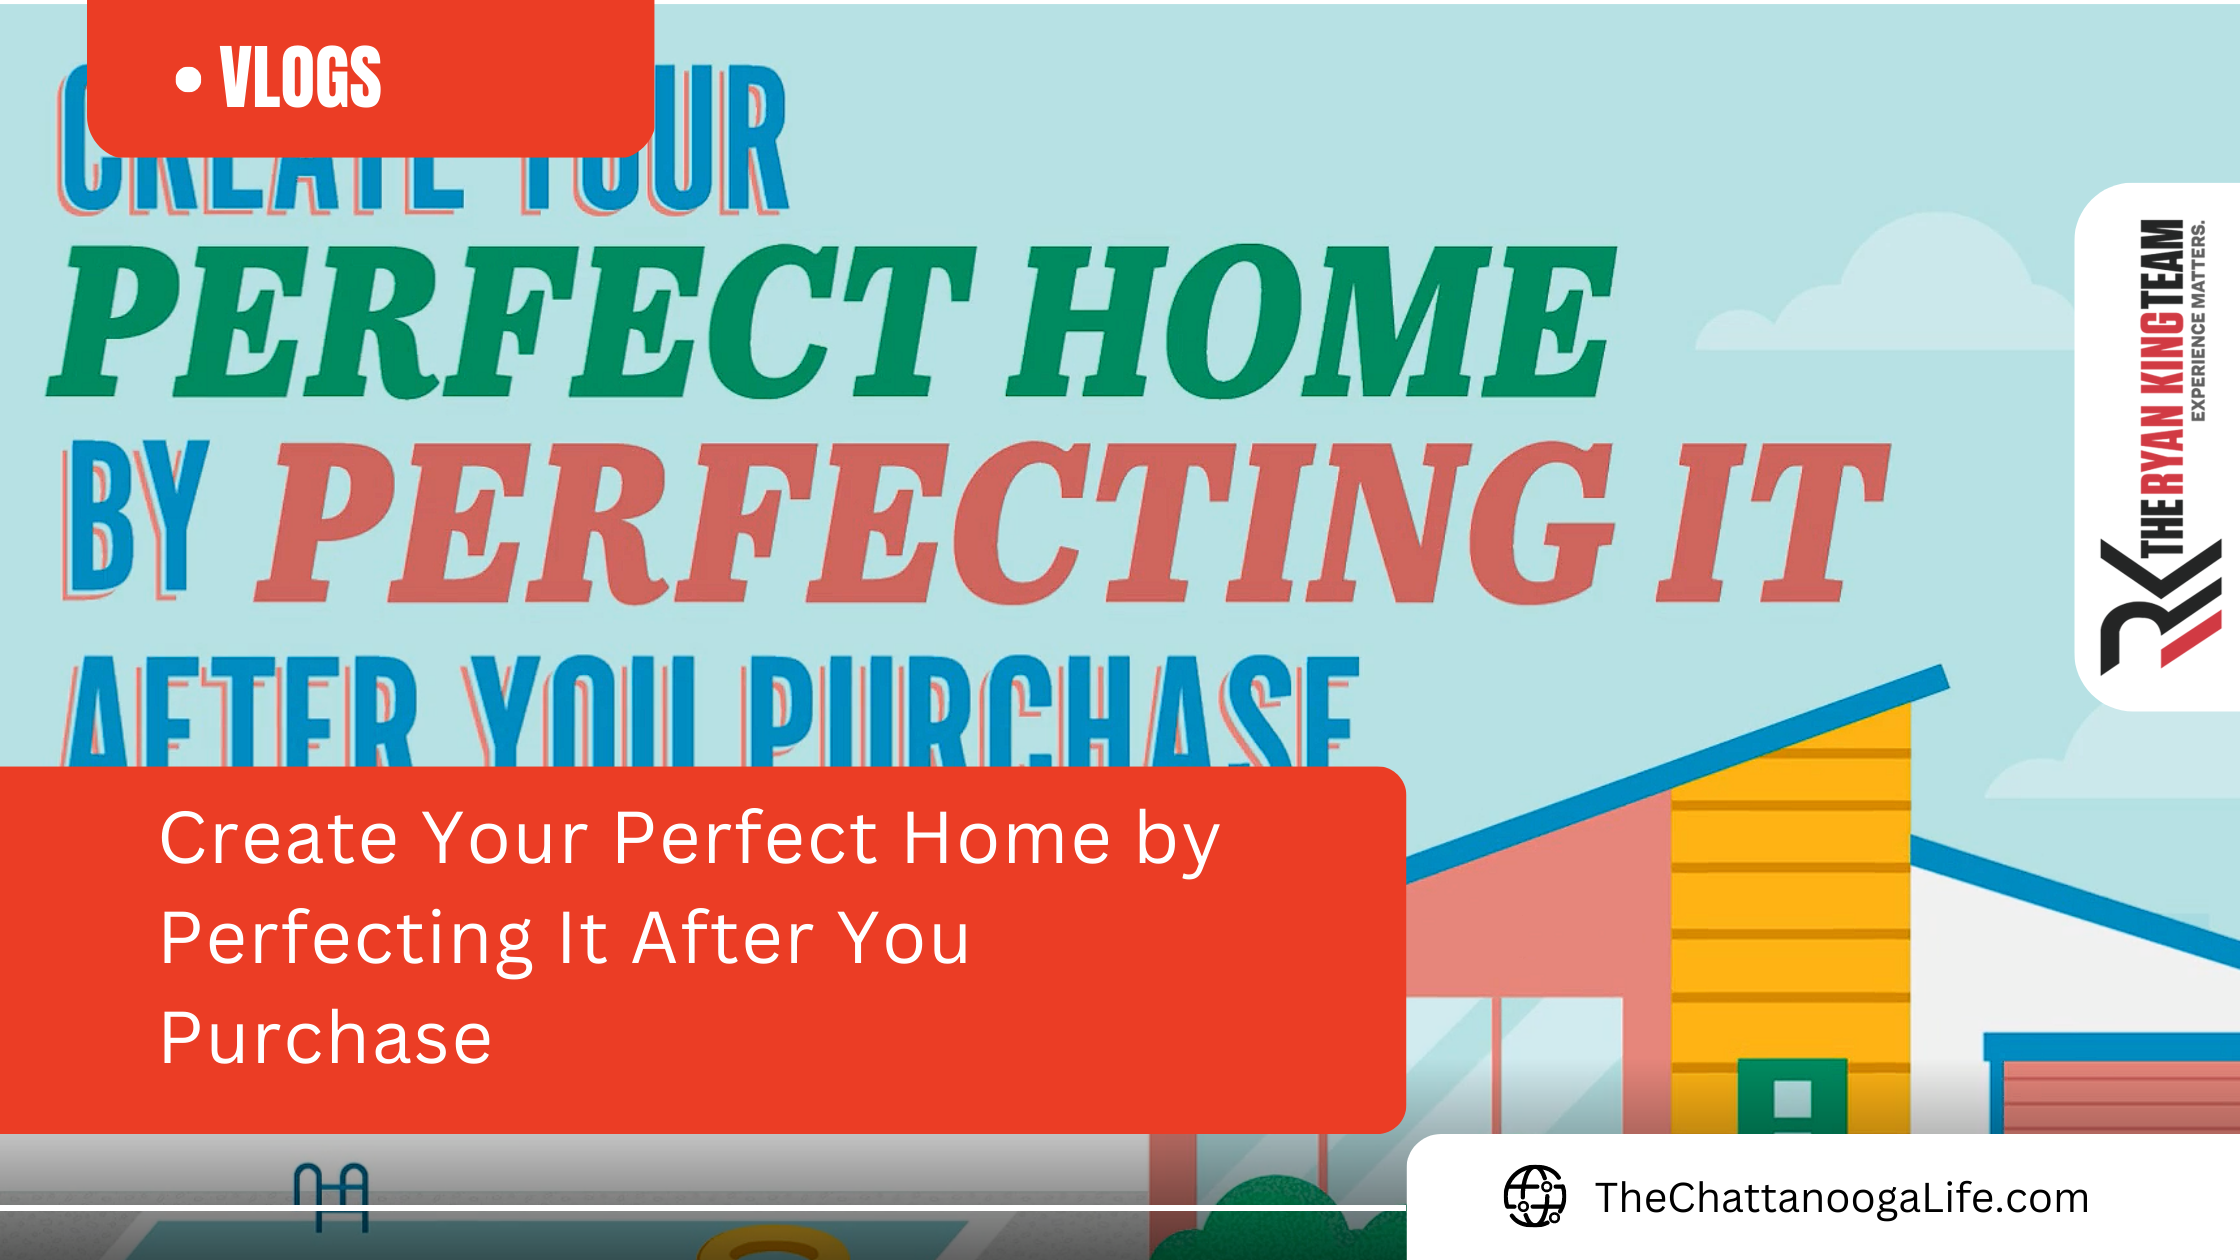 Create Your Perfect Home by Perfecting It After You Purchase